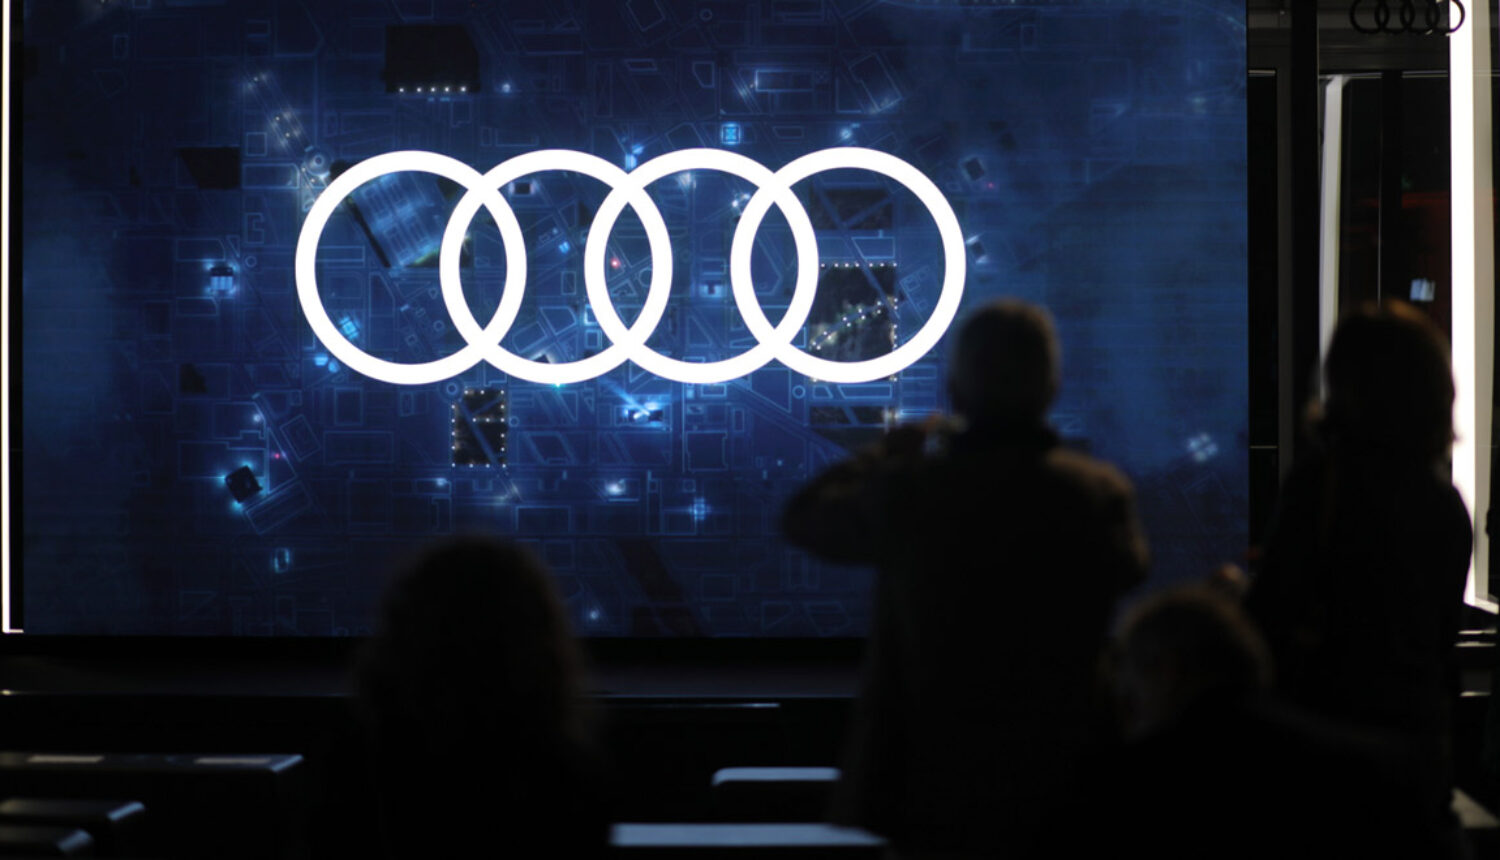 Together with Audi to promote the culture of innovation